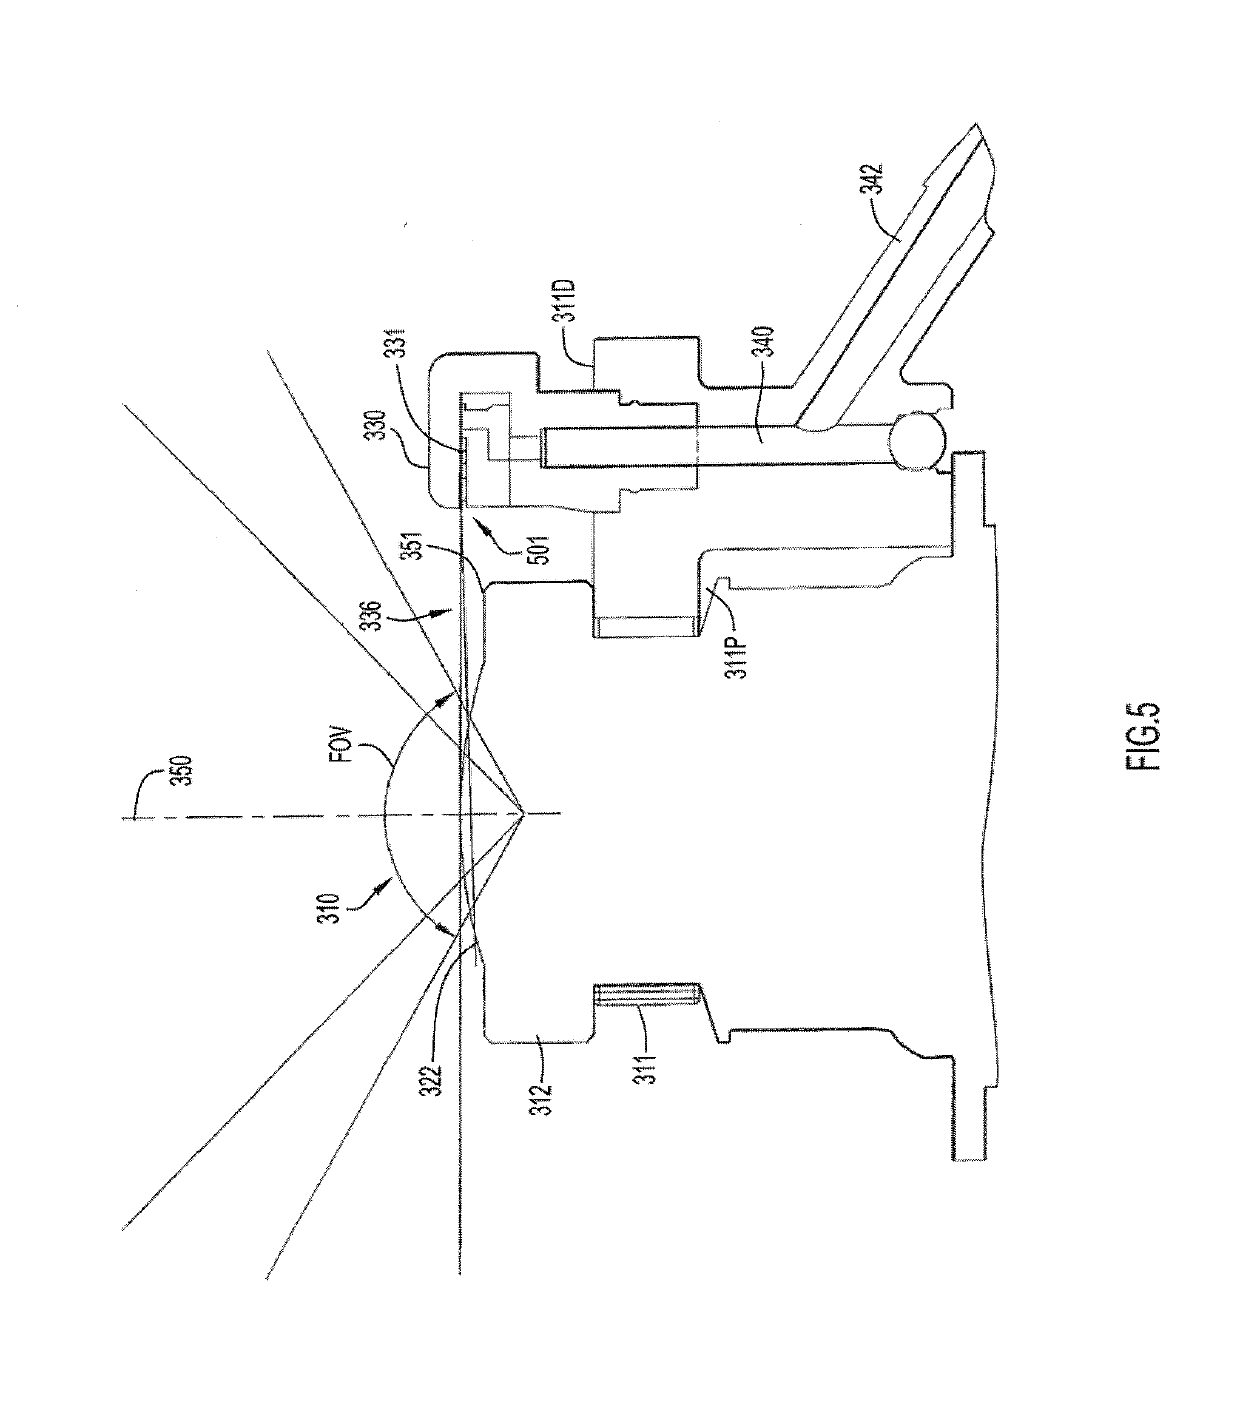 Self-contained camera wash system and method